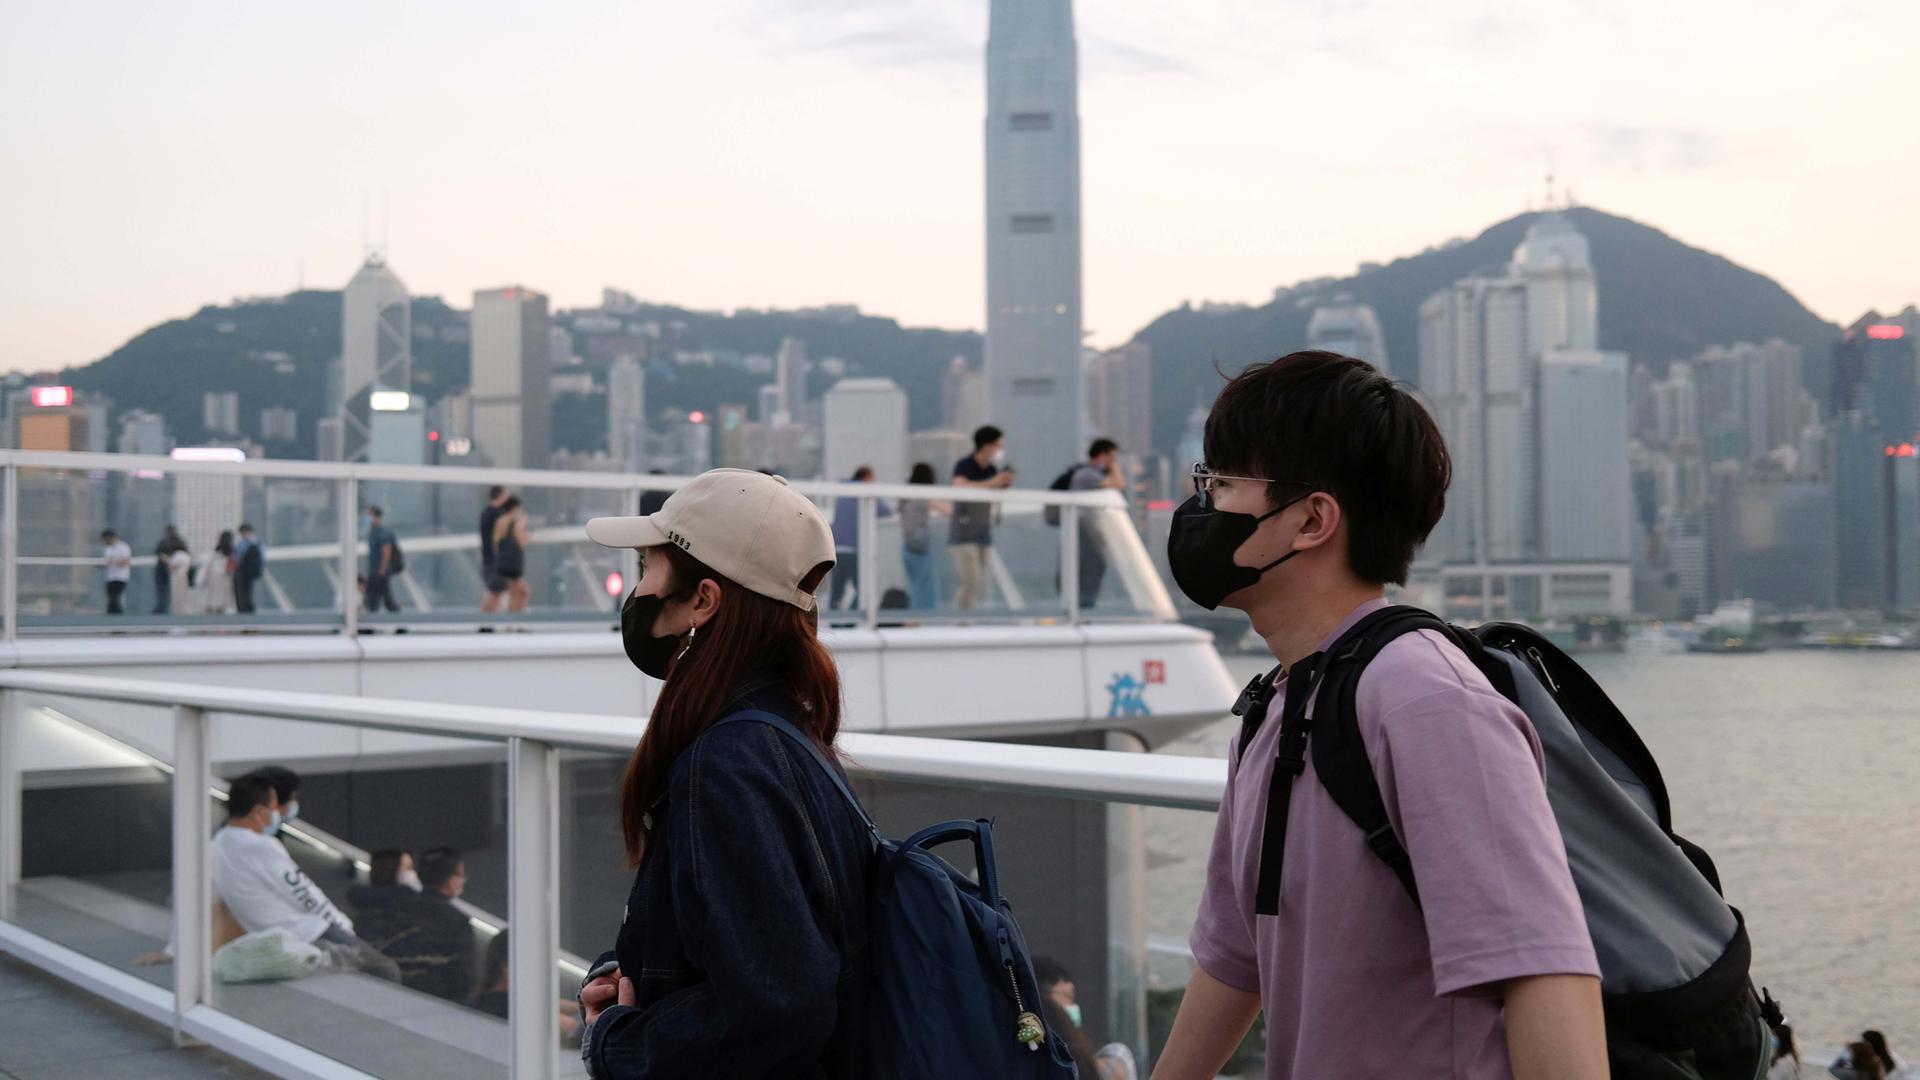 People with protective masks walk in front of Hong Kong's skyline, following the novel coronavirus disease (COVID-19) outbreak, China March 23, 2020.